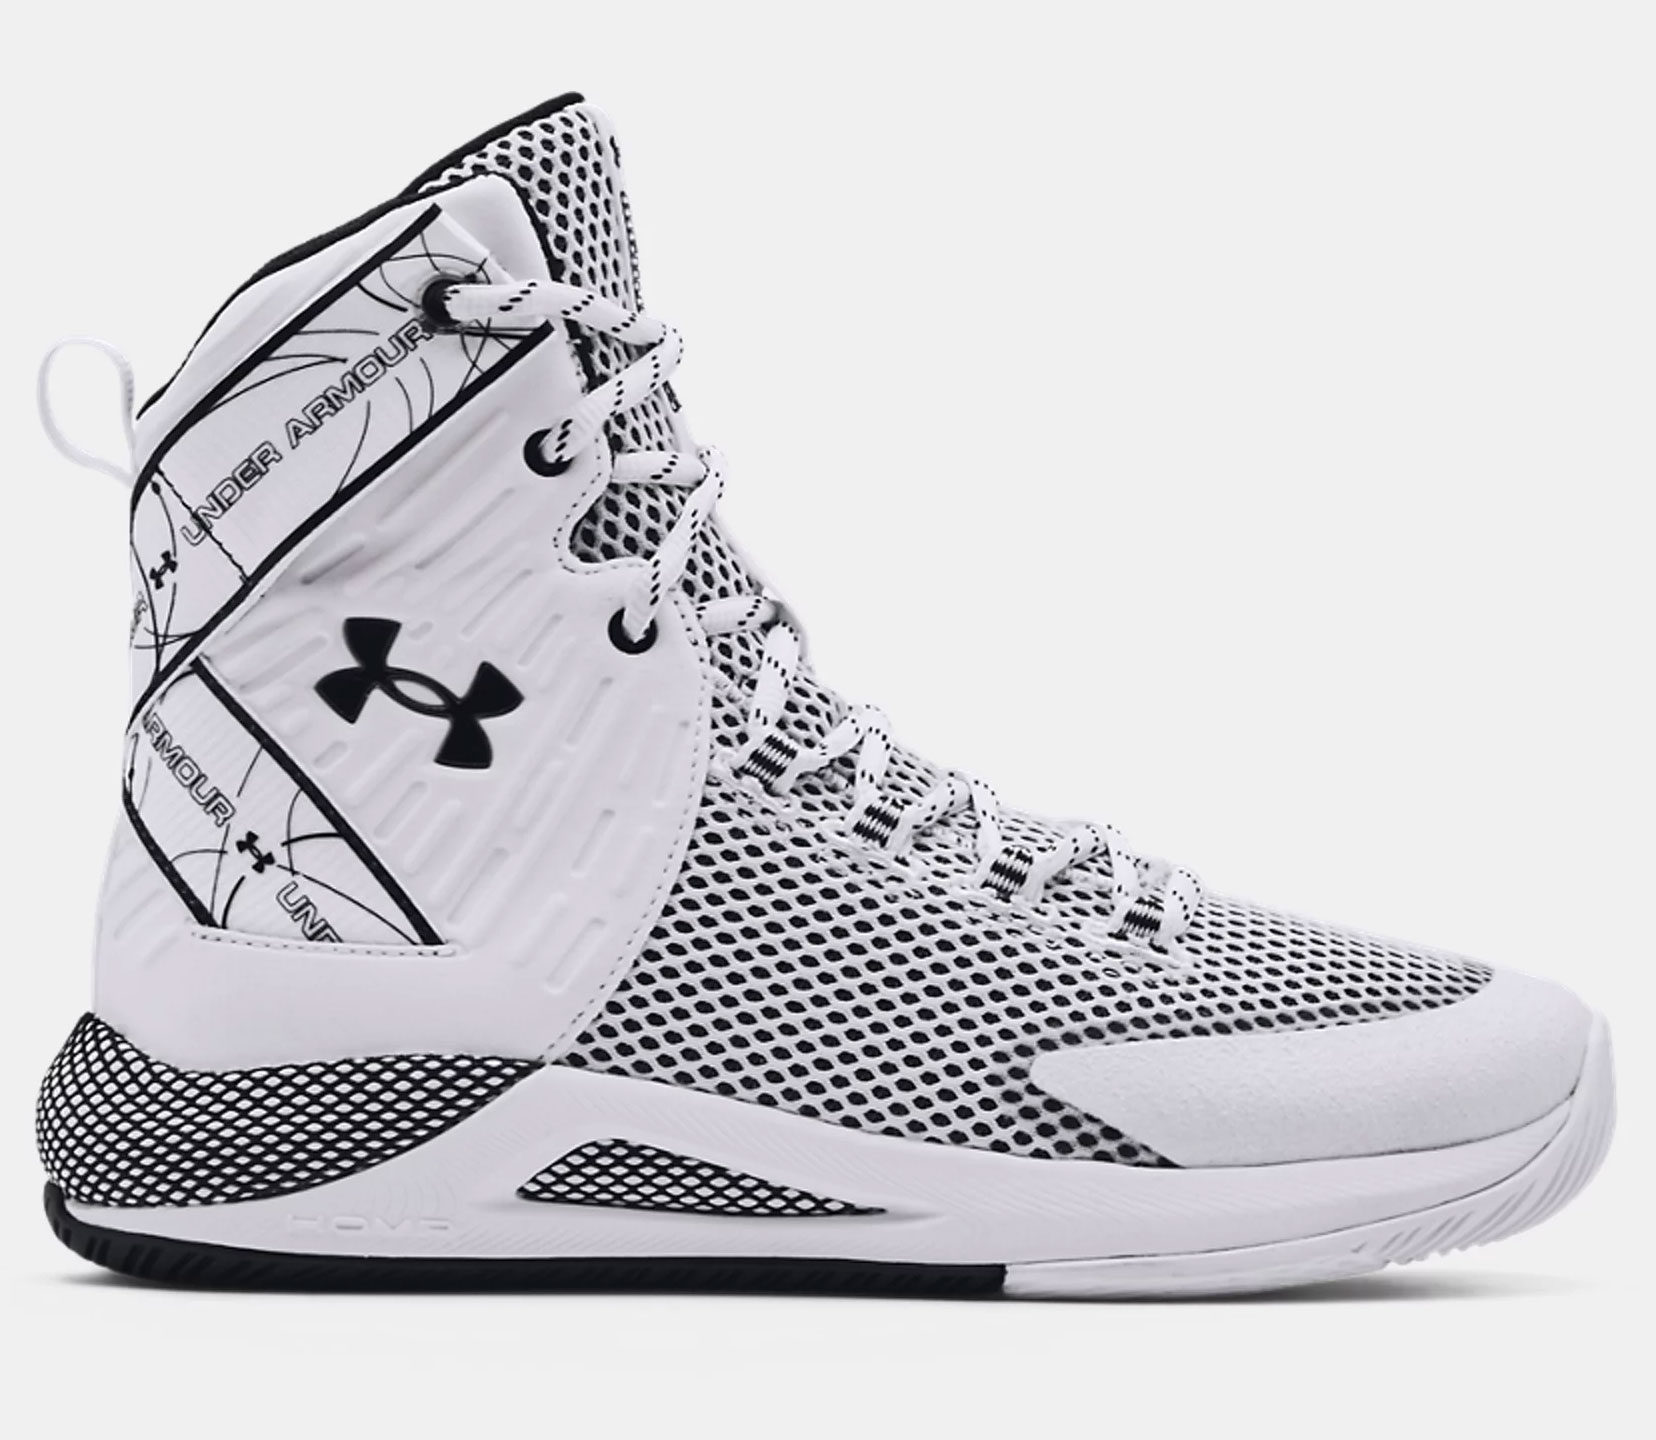 Under Armour White Gold High Top Highlight Basketball Shoes Sneakers Size:  7.5